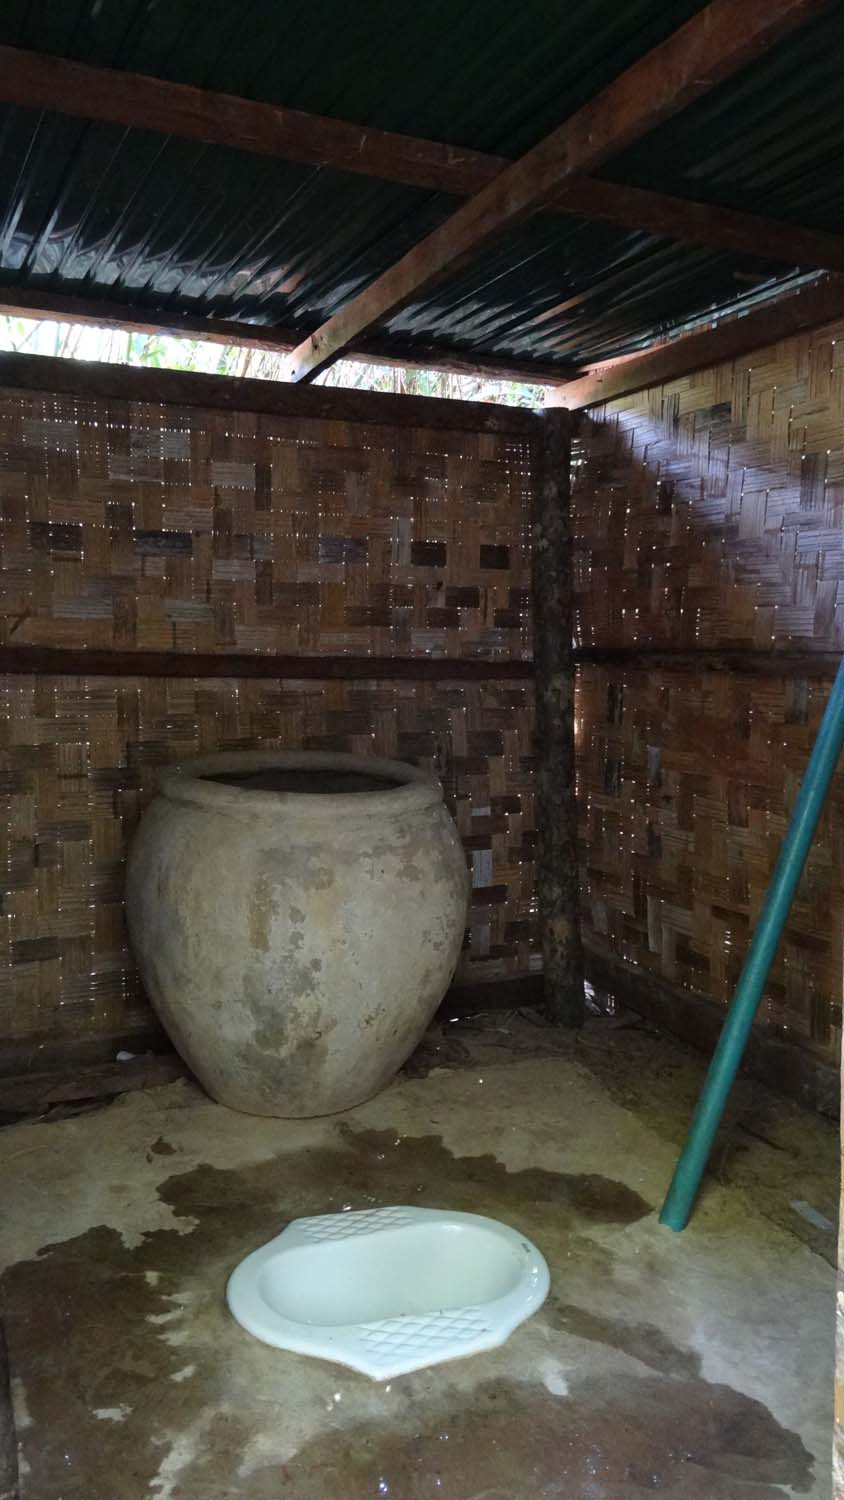 random toilet, the big stone pot has the water in it to flush